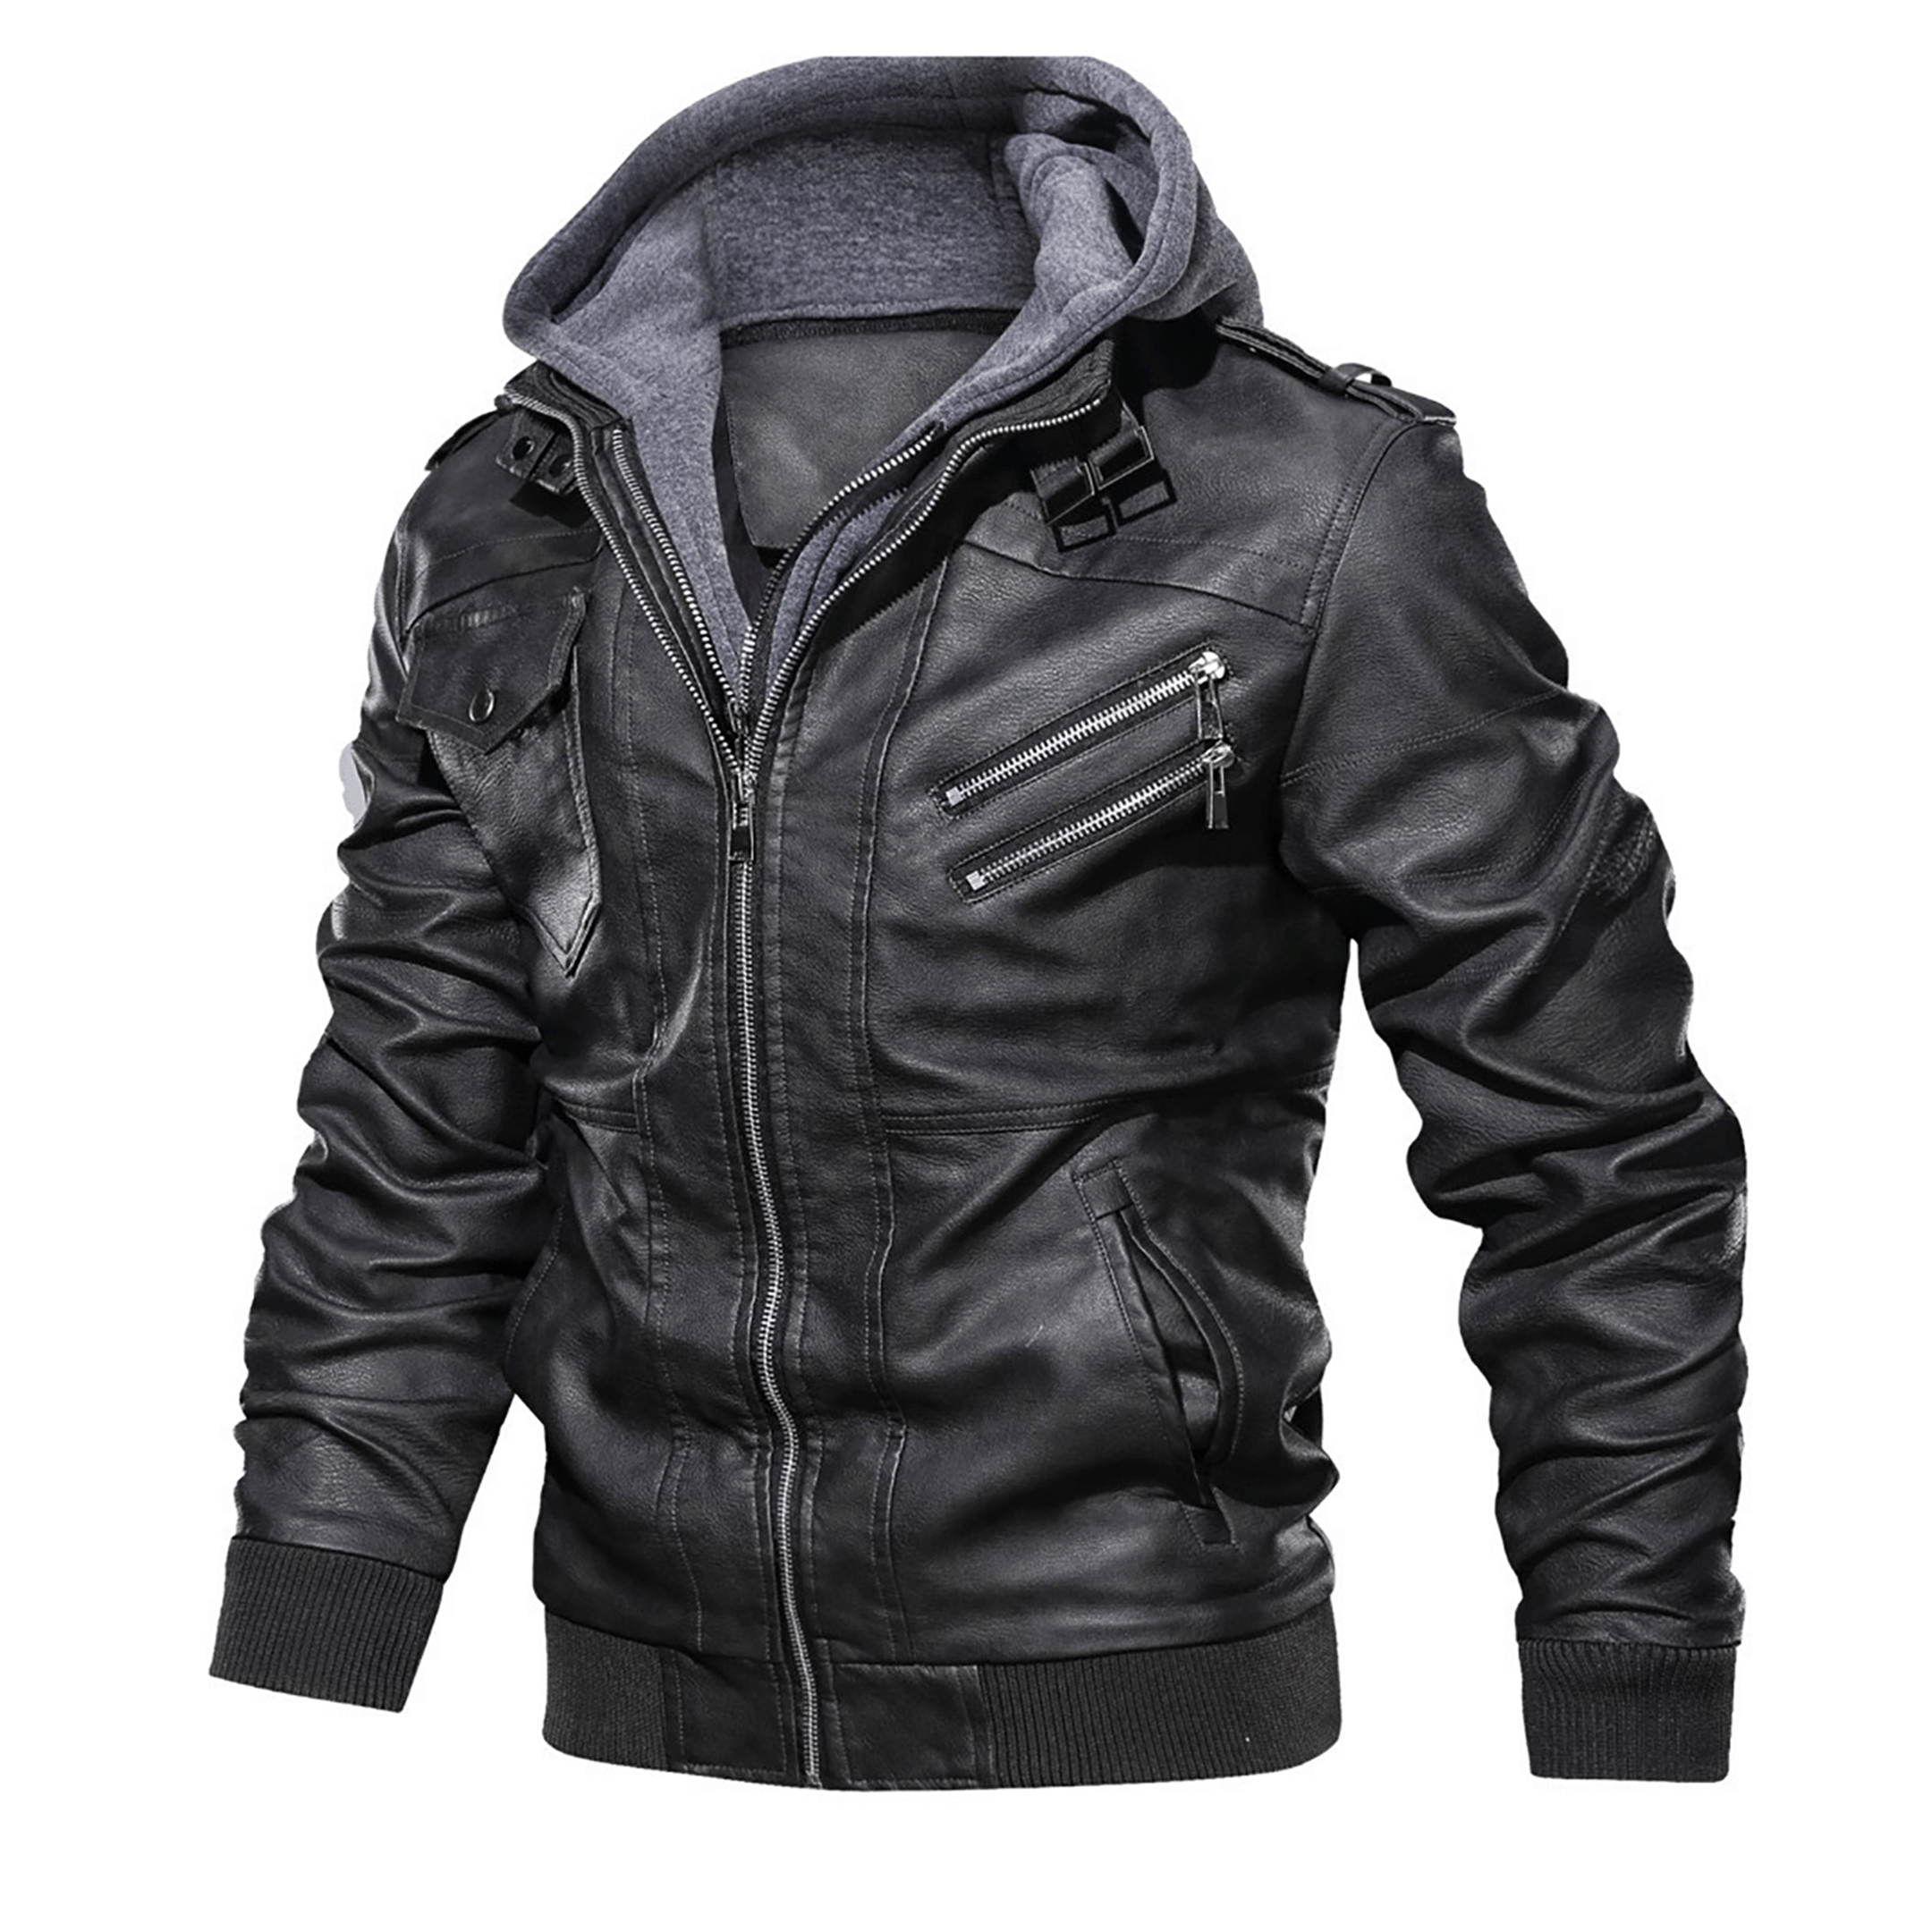 Top leather jackets and latest products 287